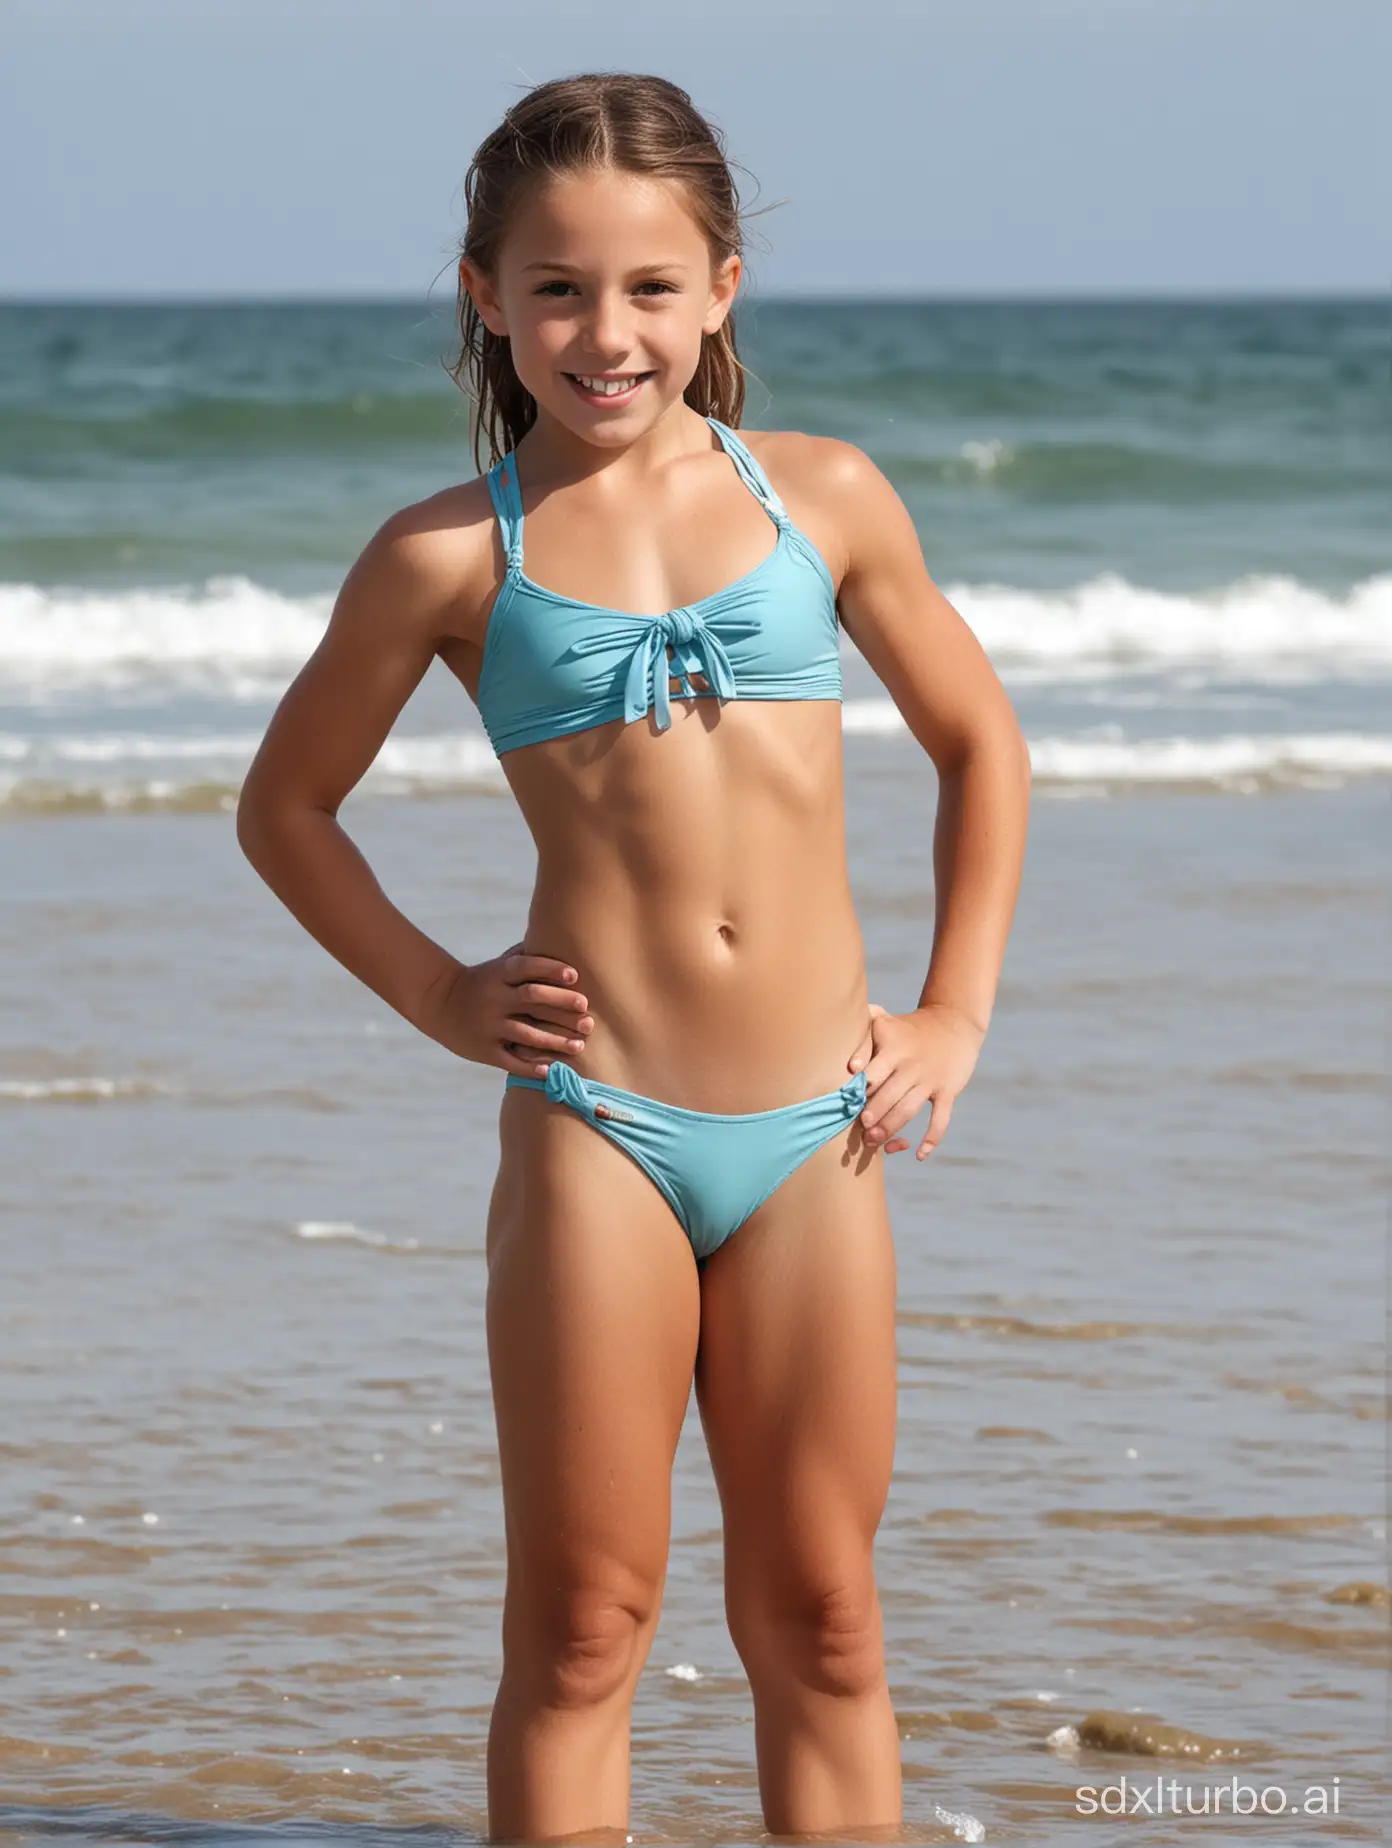 Caitlin-Clark-Confident-8YearOld-Beachgoer-with-Muscular-Abs-and-Vibrant-Swimsuit